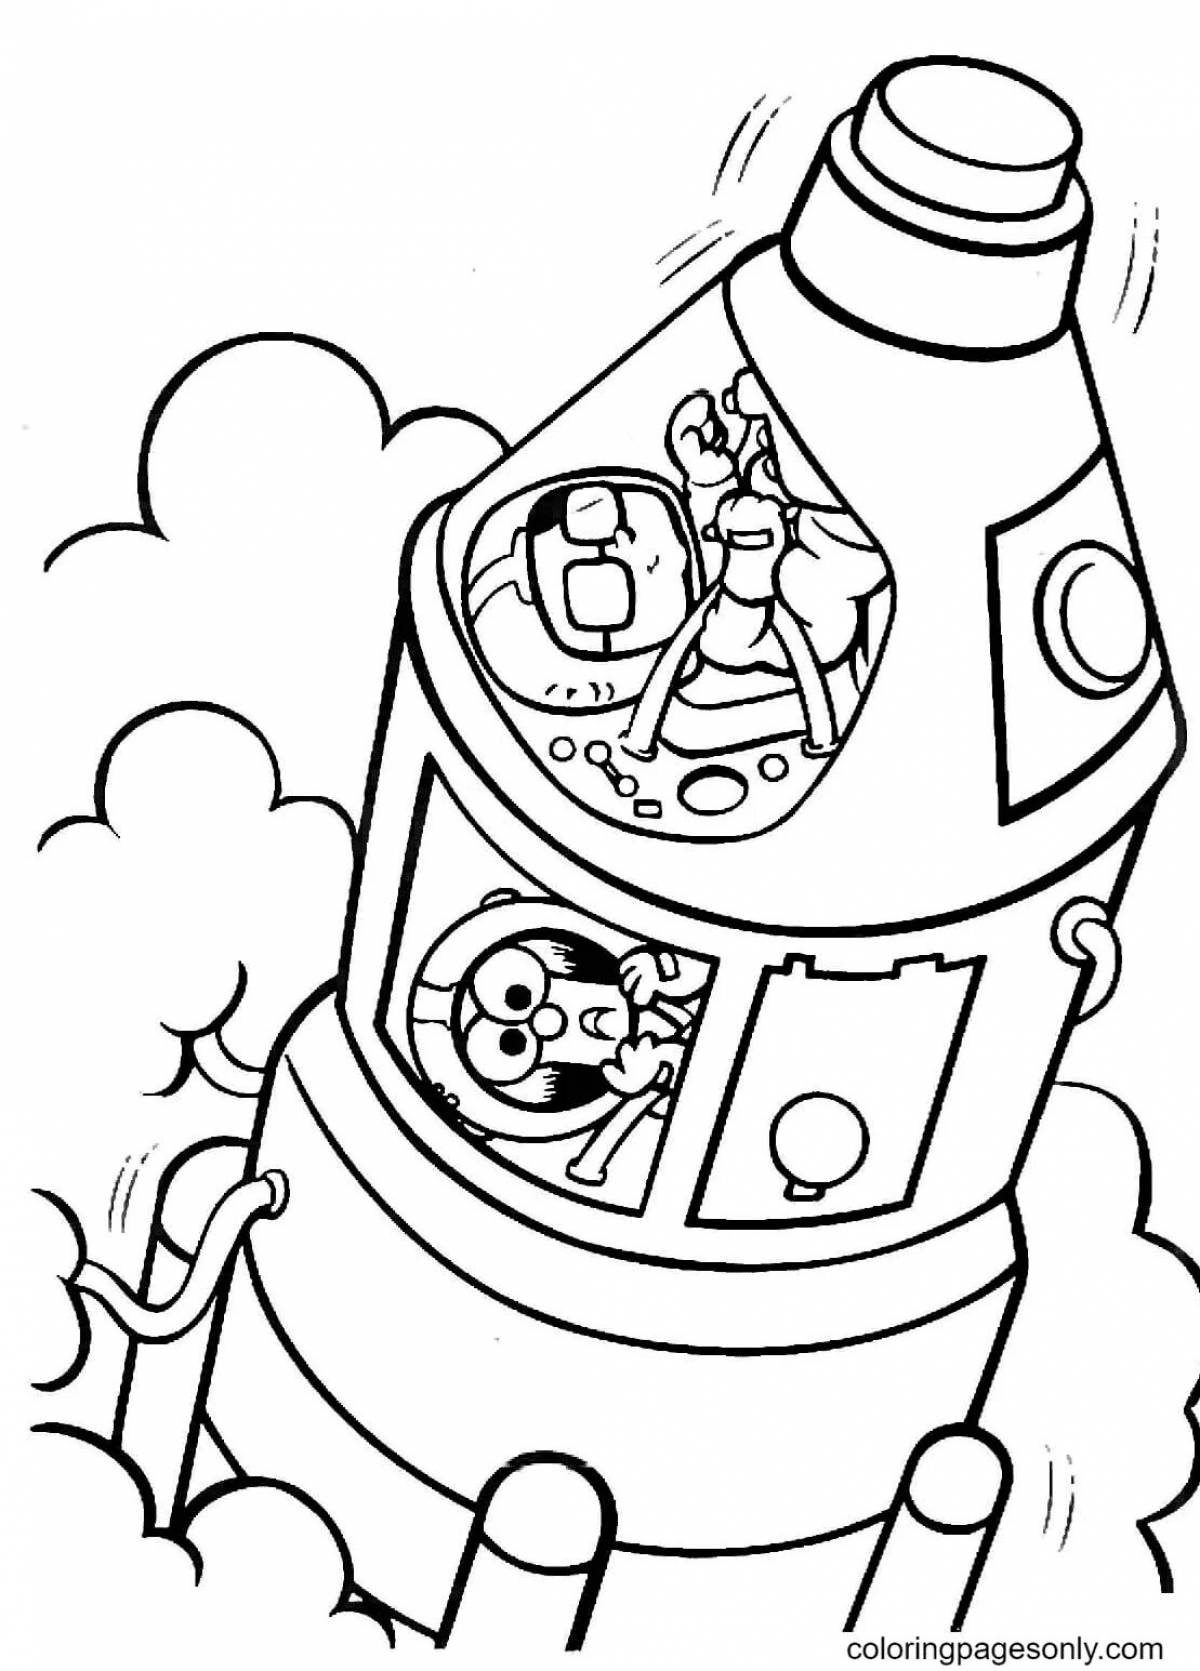 Fun coloring sharanauts heroes of space